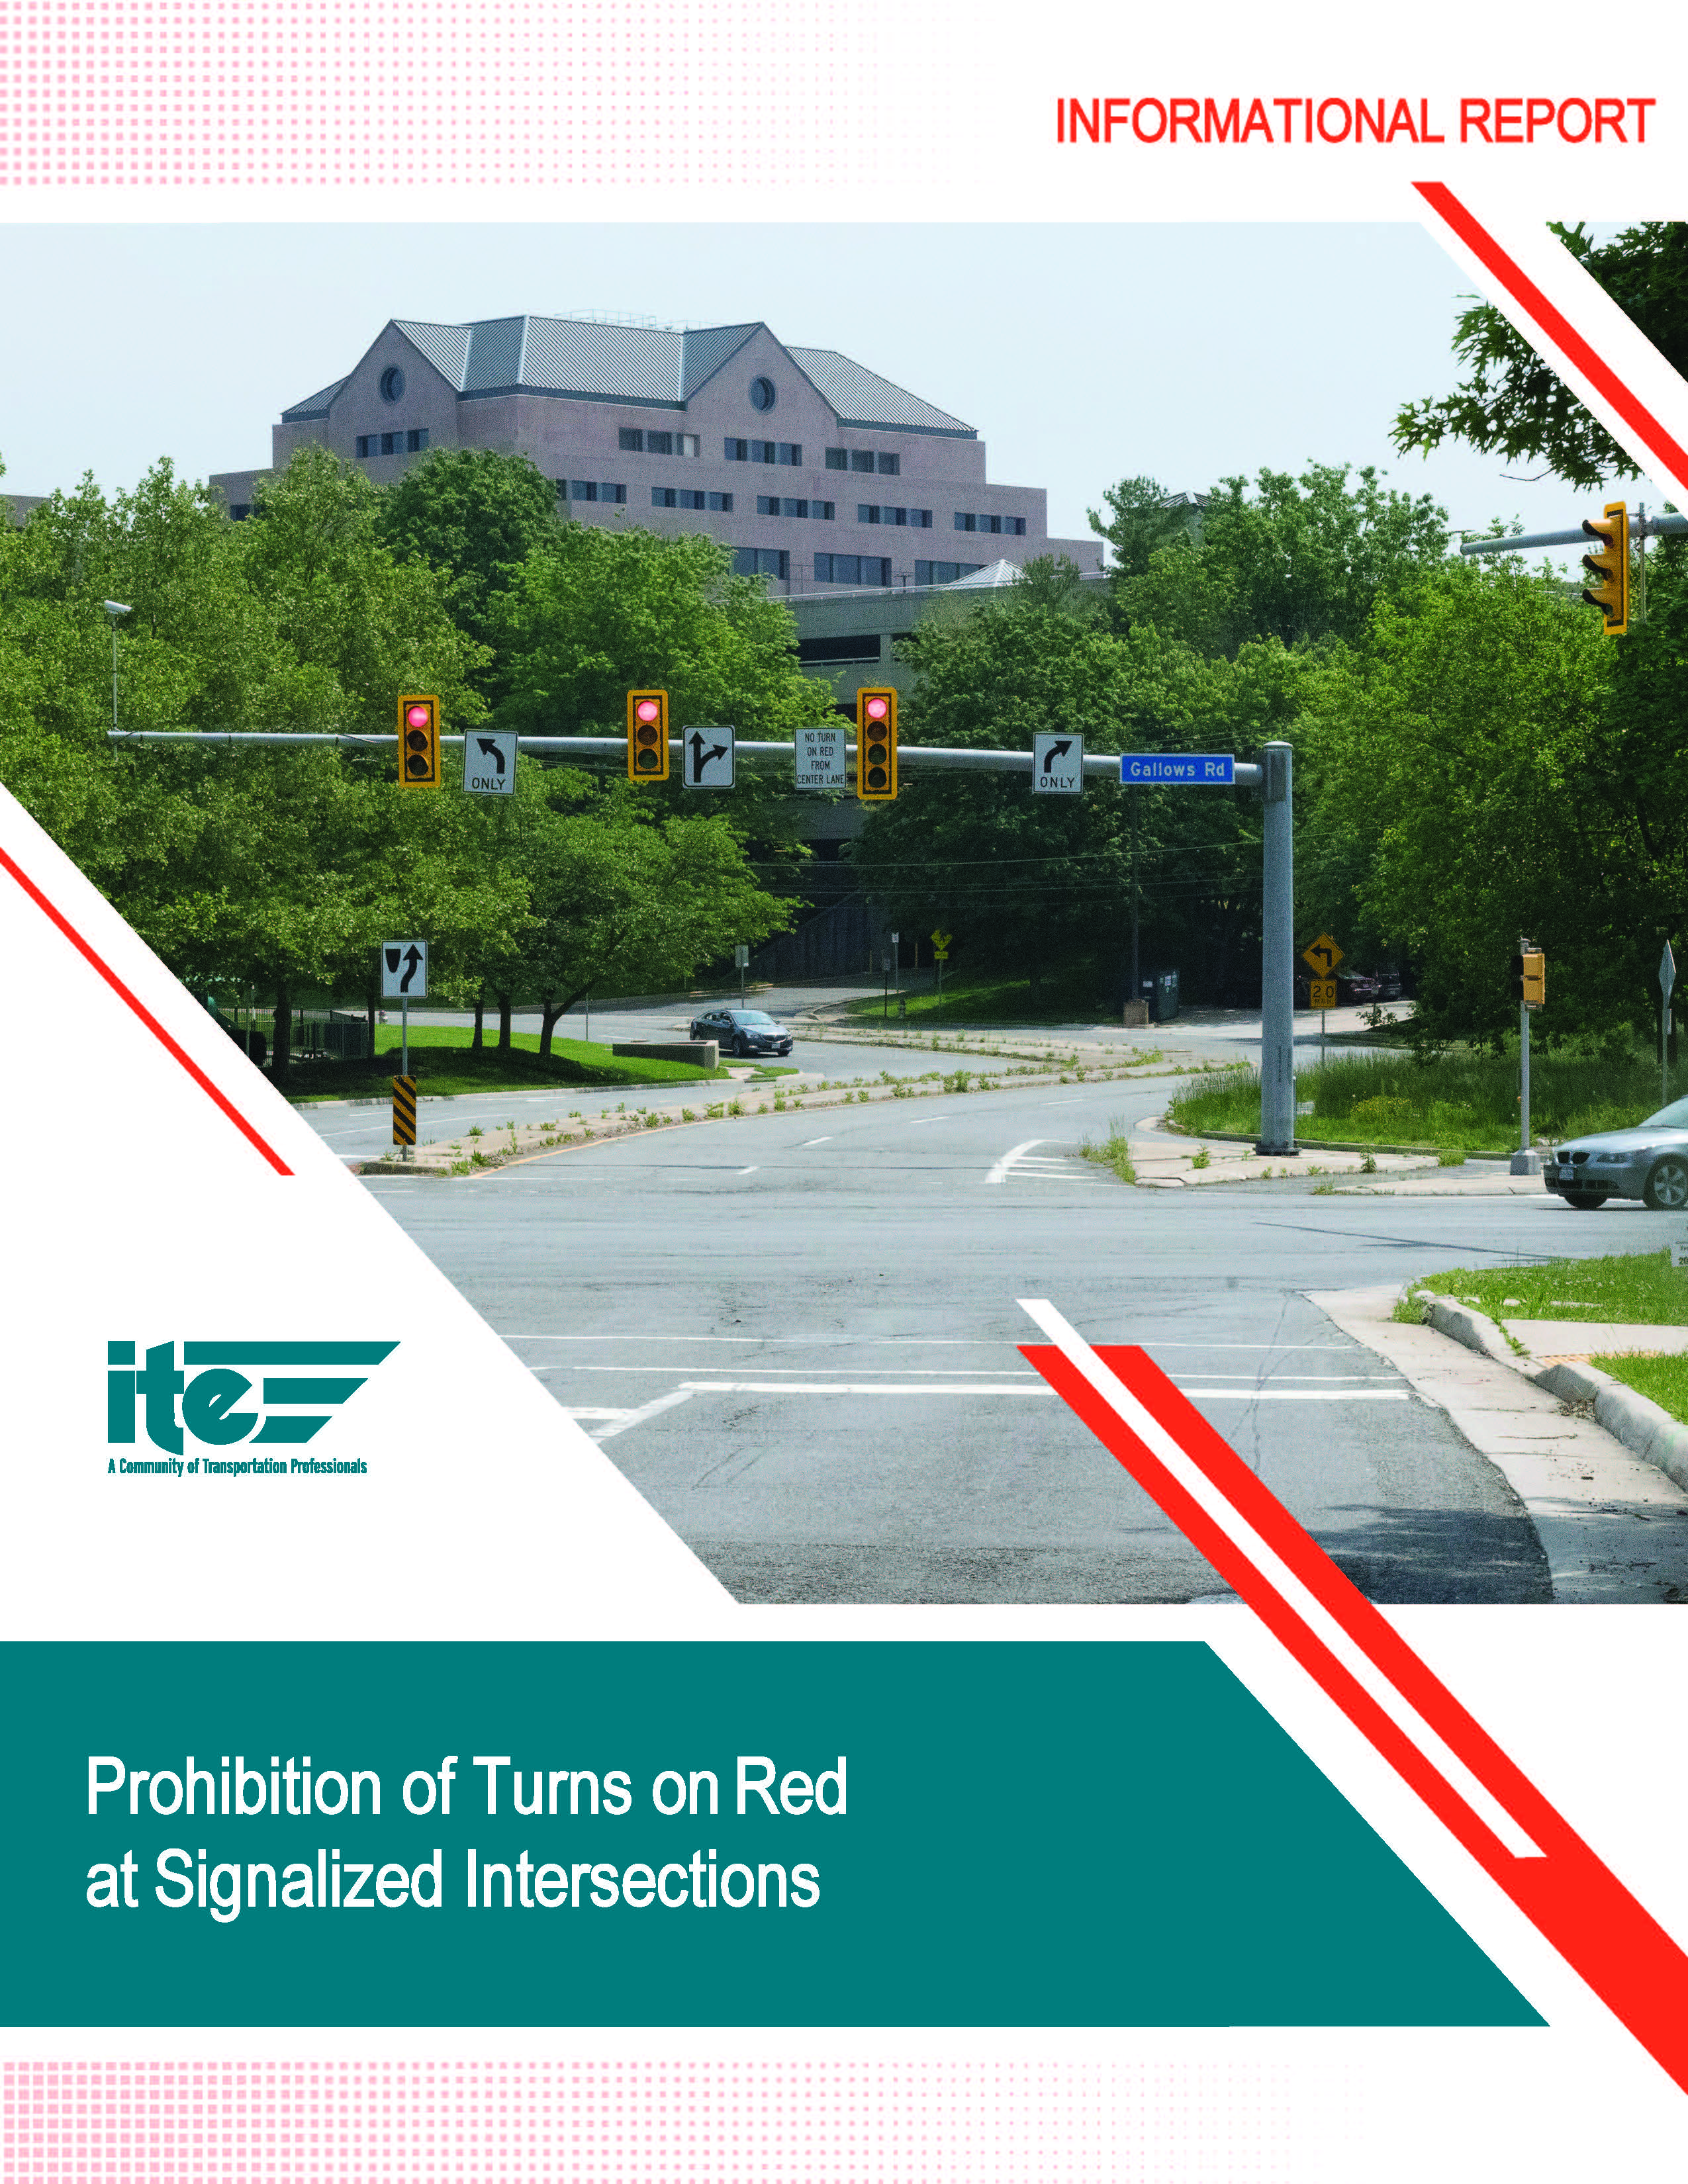 Prohibition of Turns on Red at Signalized Intersections